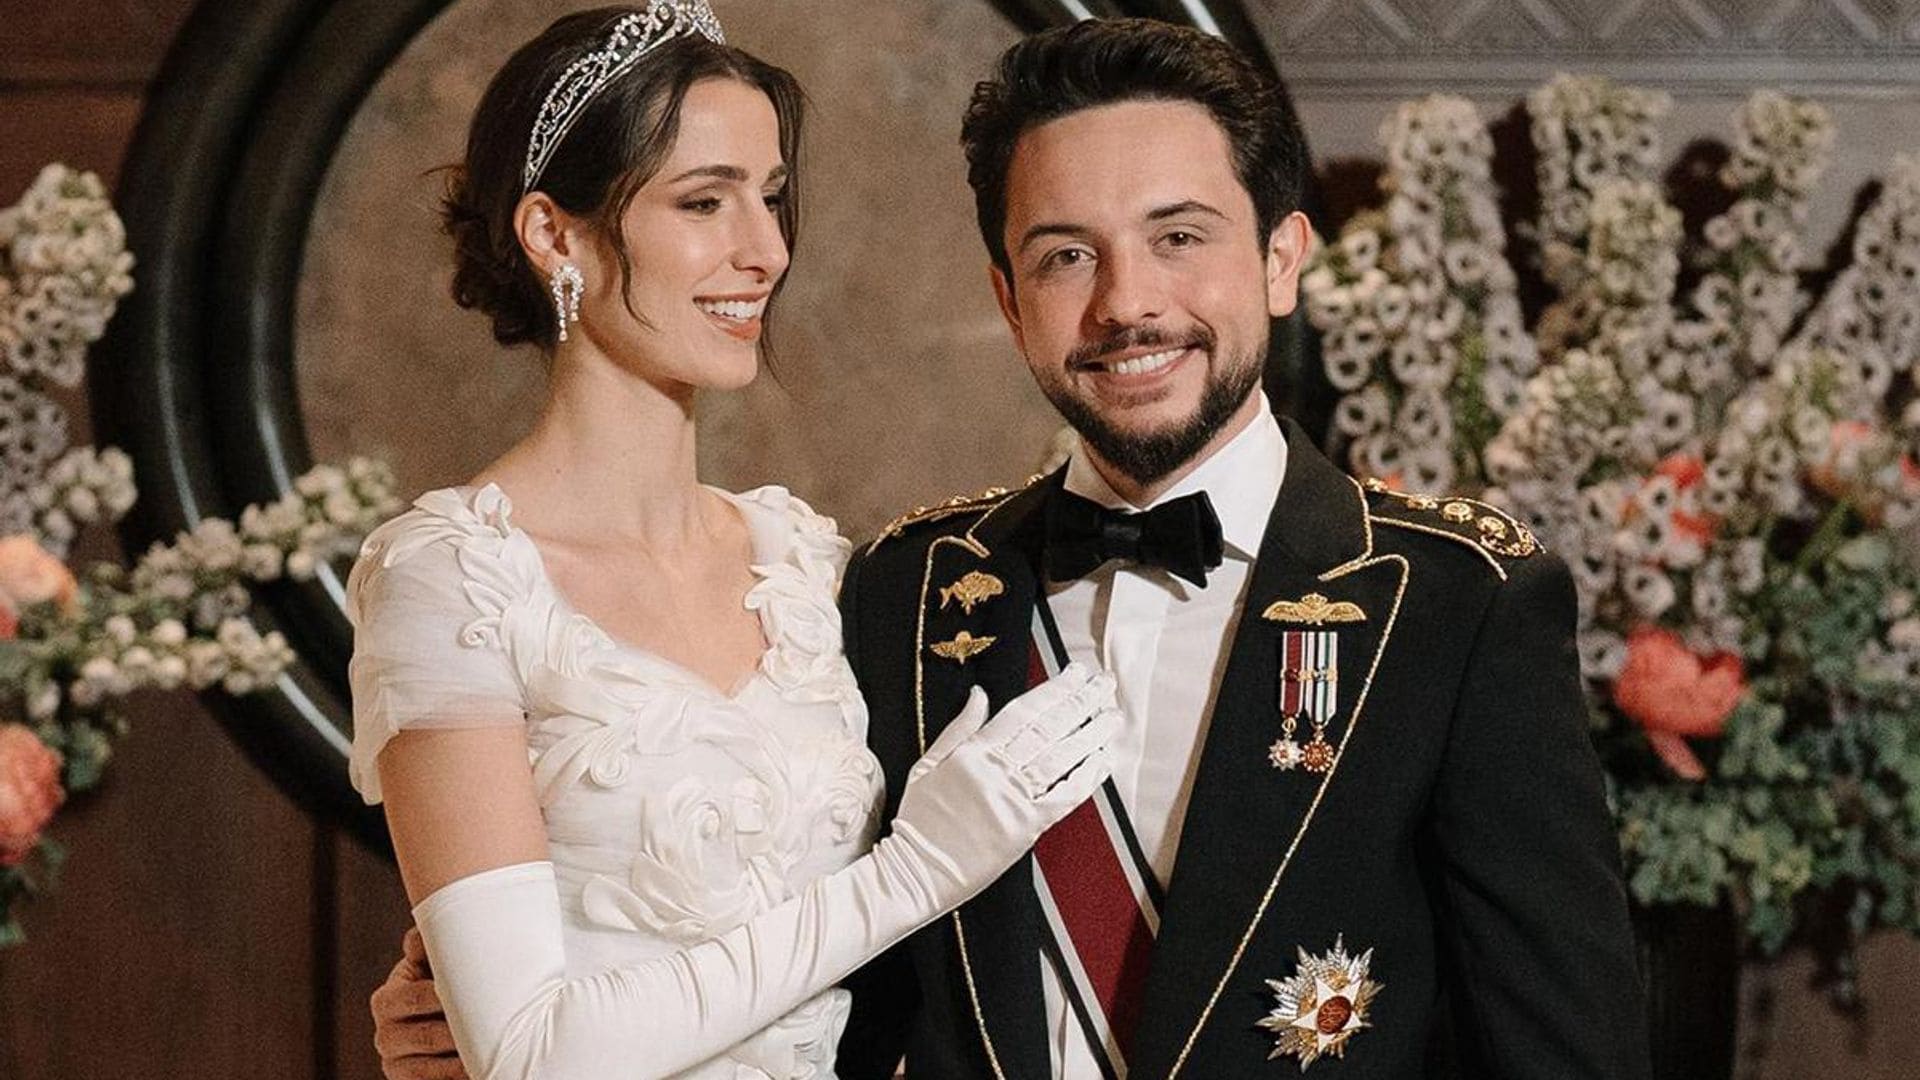 Royal baby alert! Crown Prince Hussein and Princess Rajwa expecting their first child